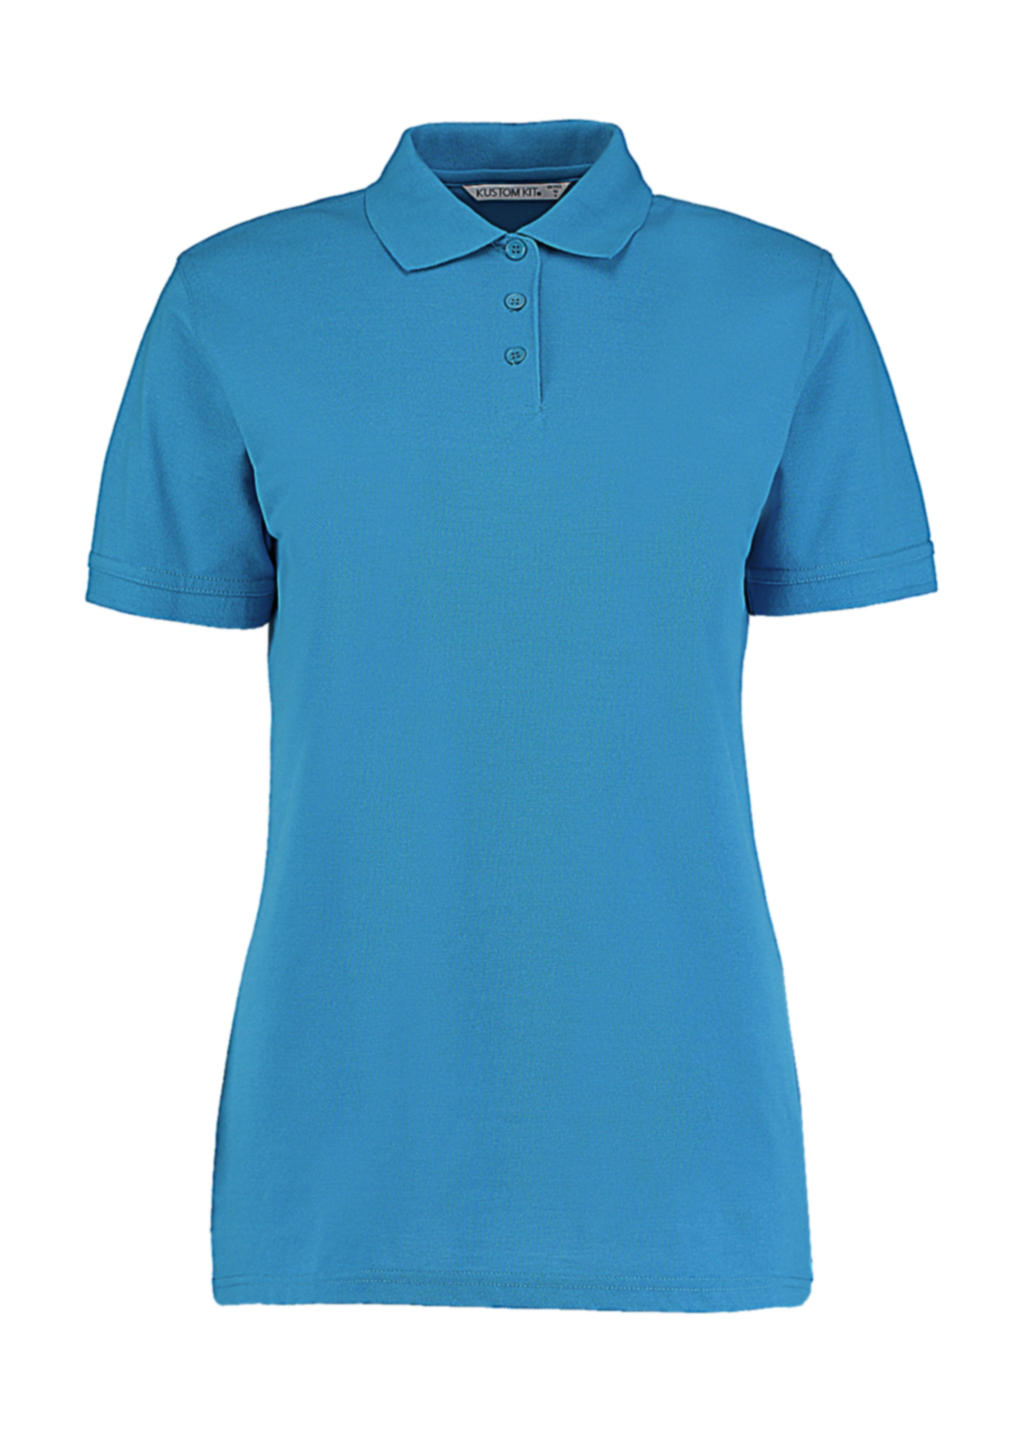  Ladies Classic Fit Polo Superwash? 60? in Farbe Turquoise